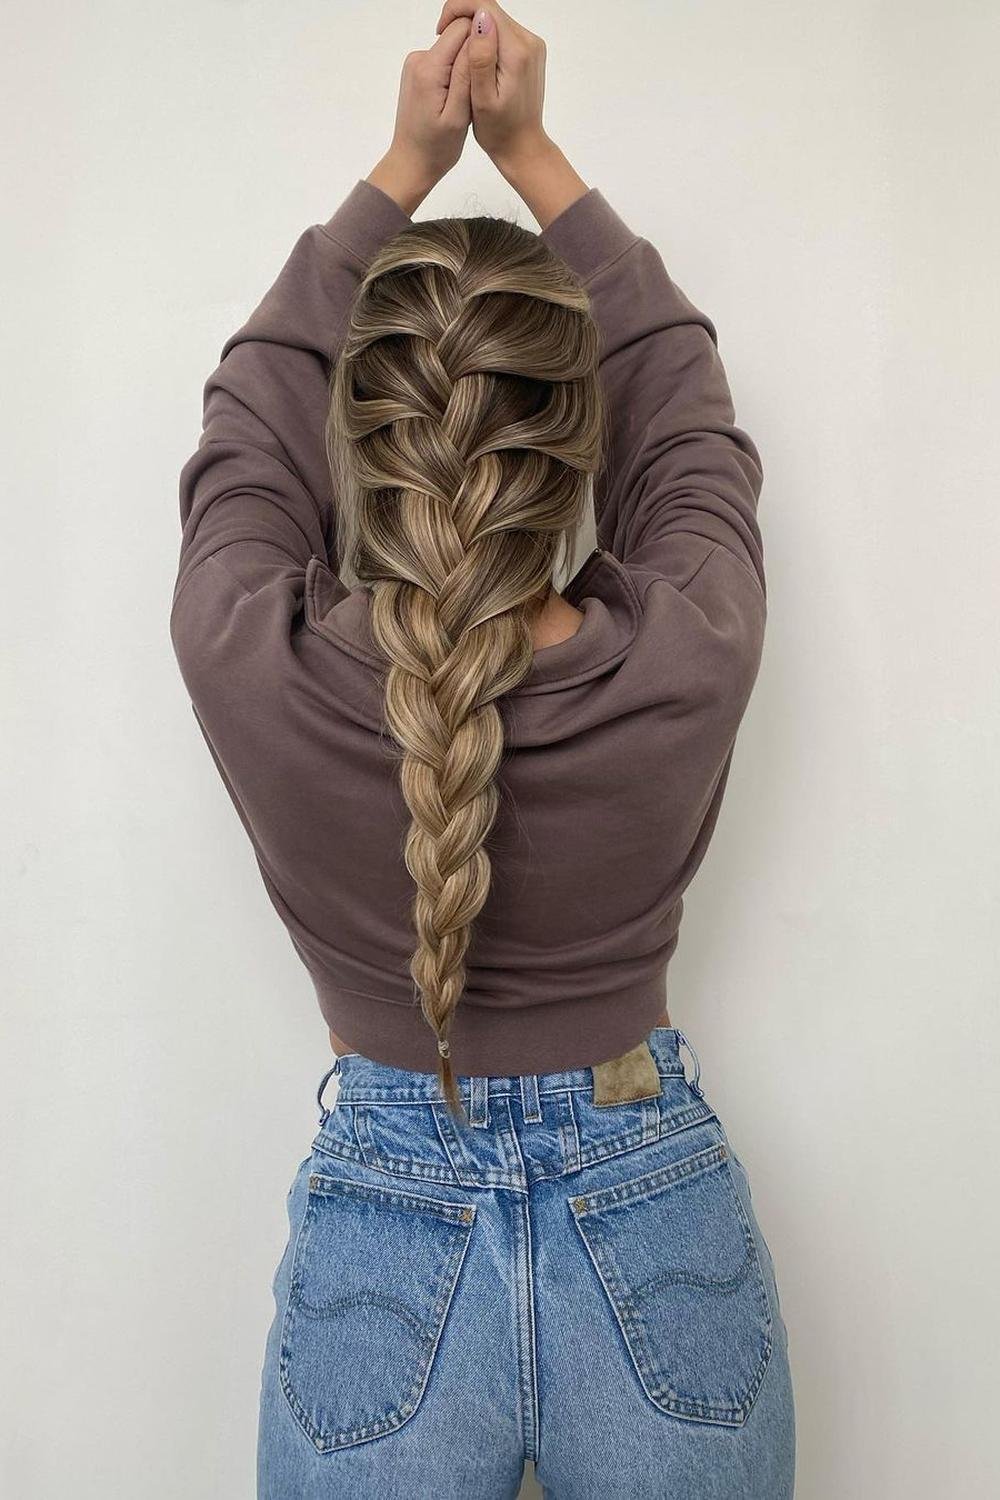 7 - Picture of Braided Hairstyles